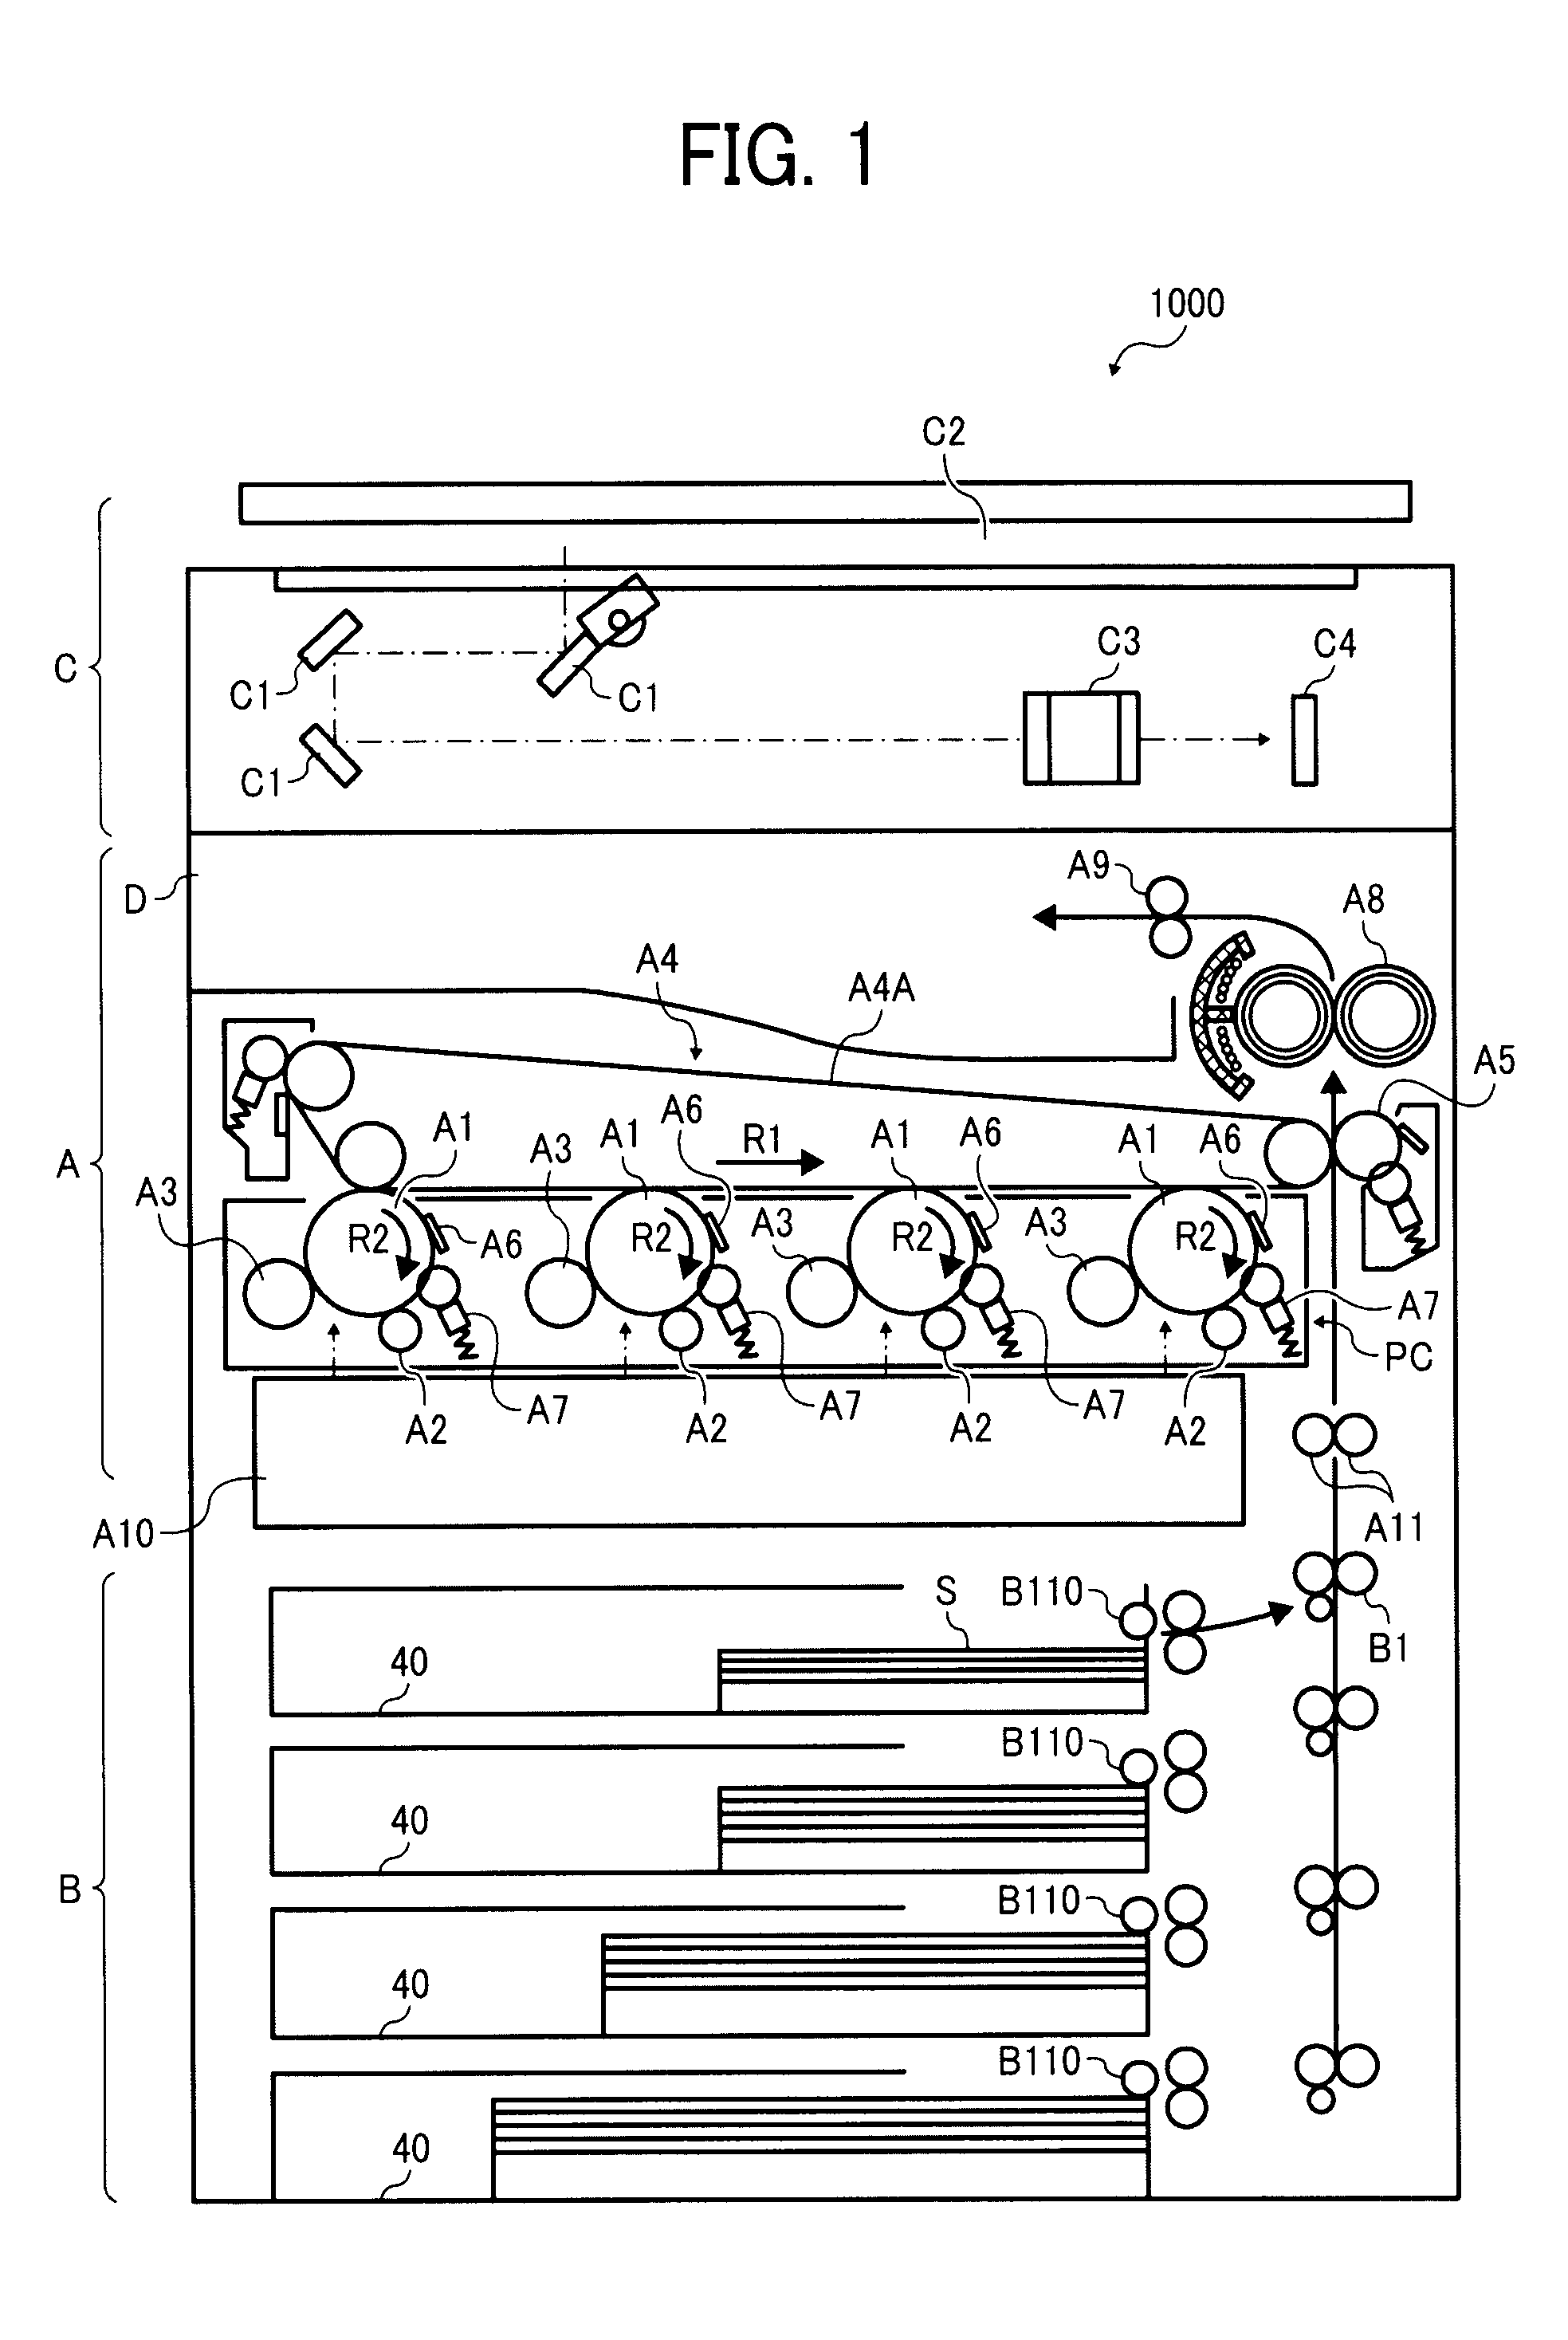 Image forming apparatus, fixing device, and heat-generating rotary member using induction heating